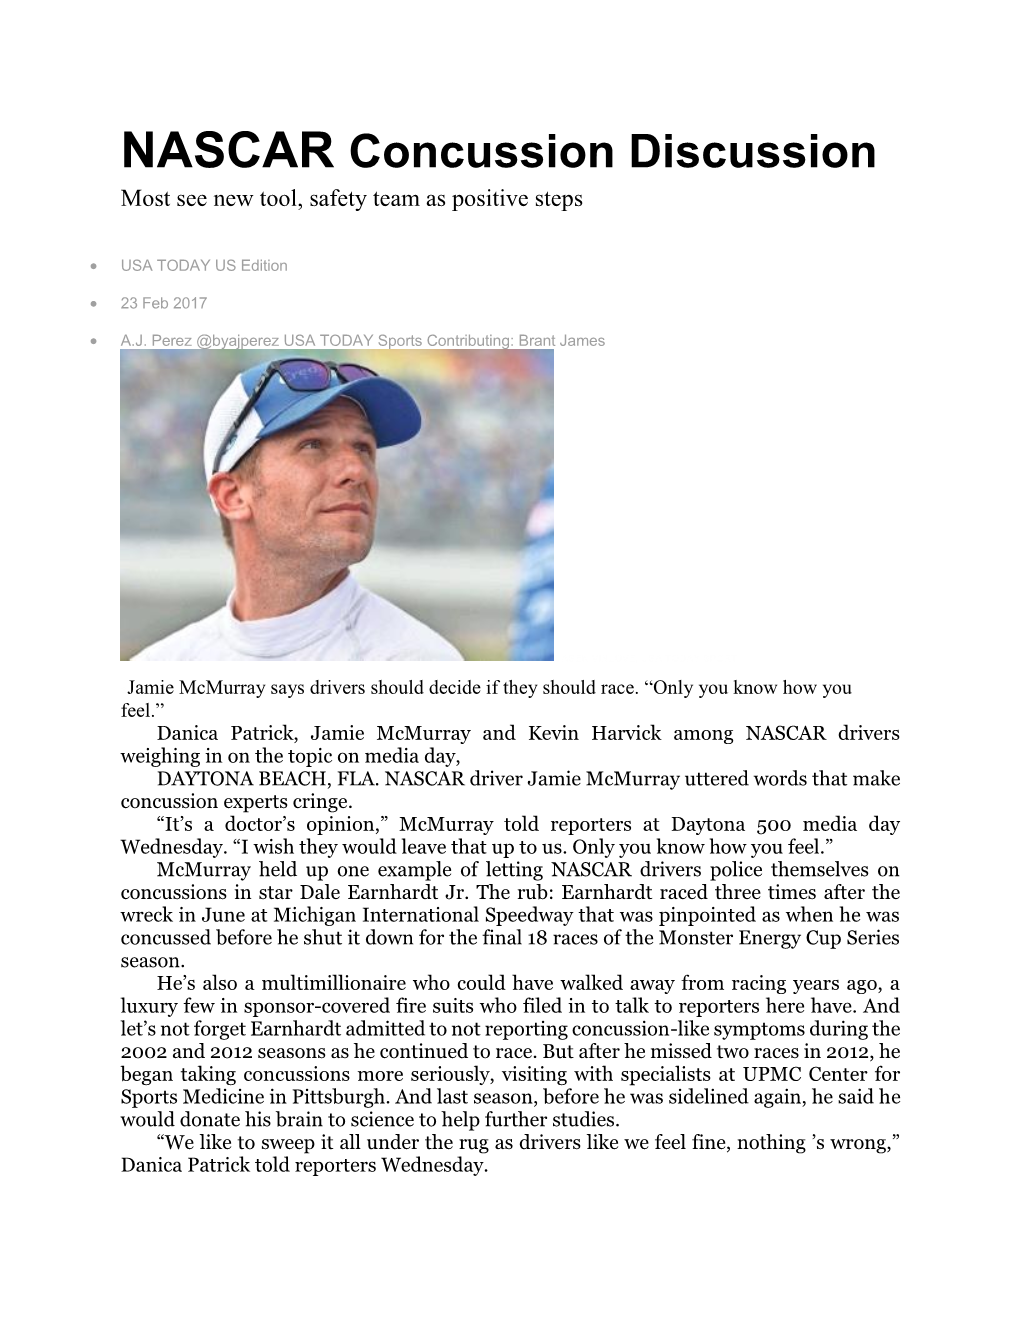 NASCAR Concussion Discussion Most See New Tool, Safety Team As Positive Steps